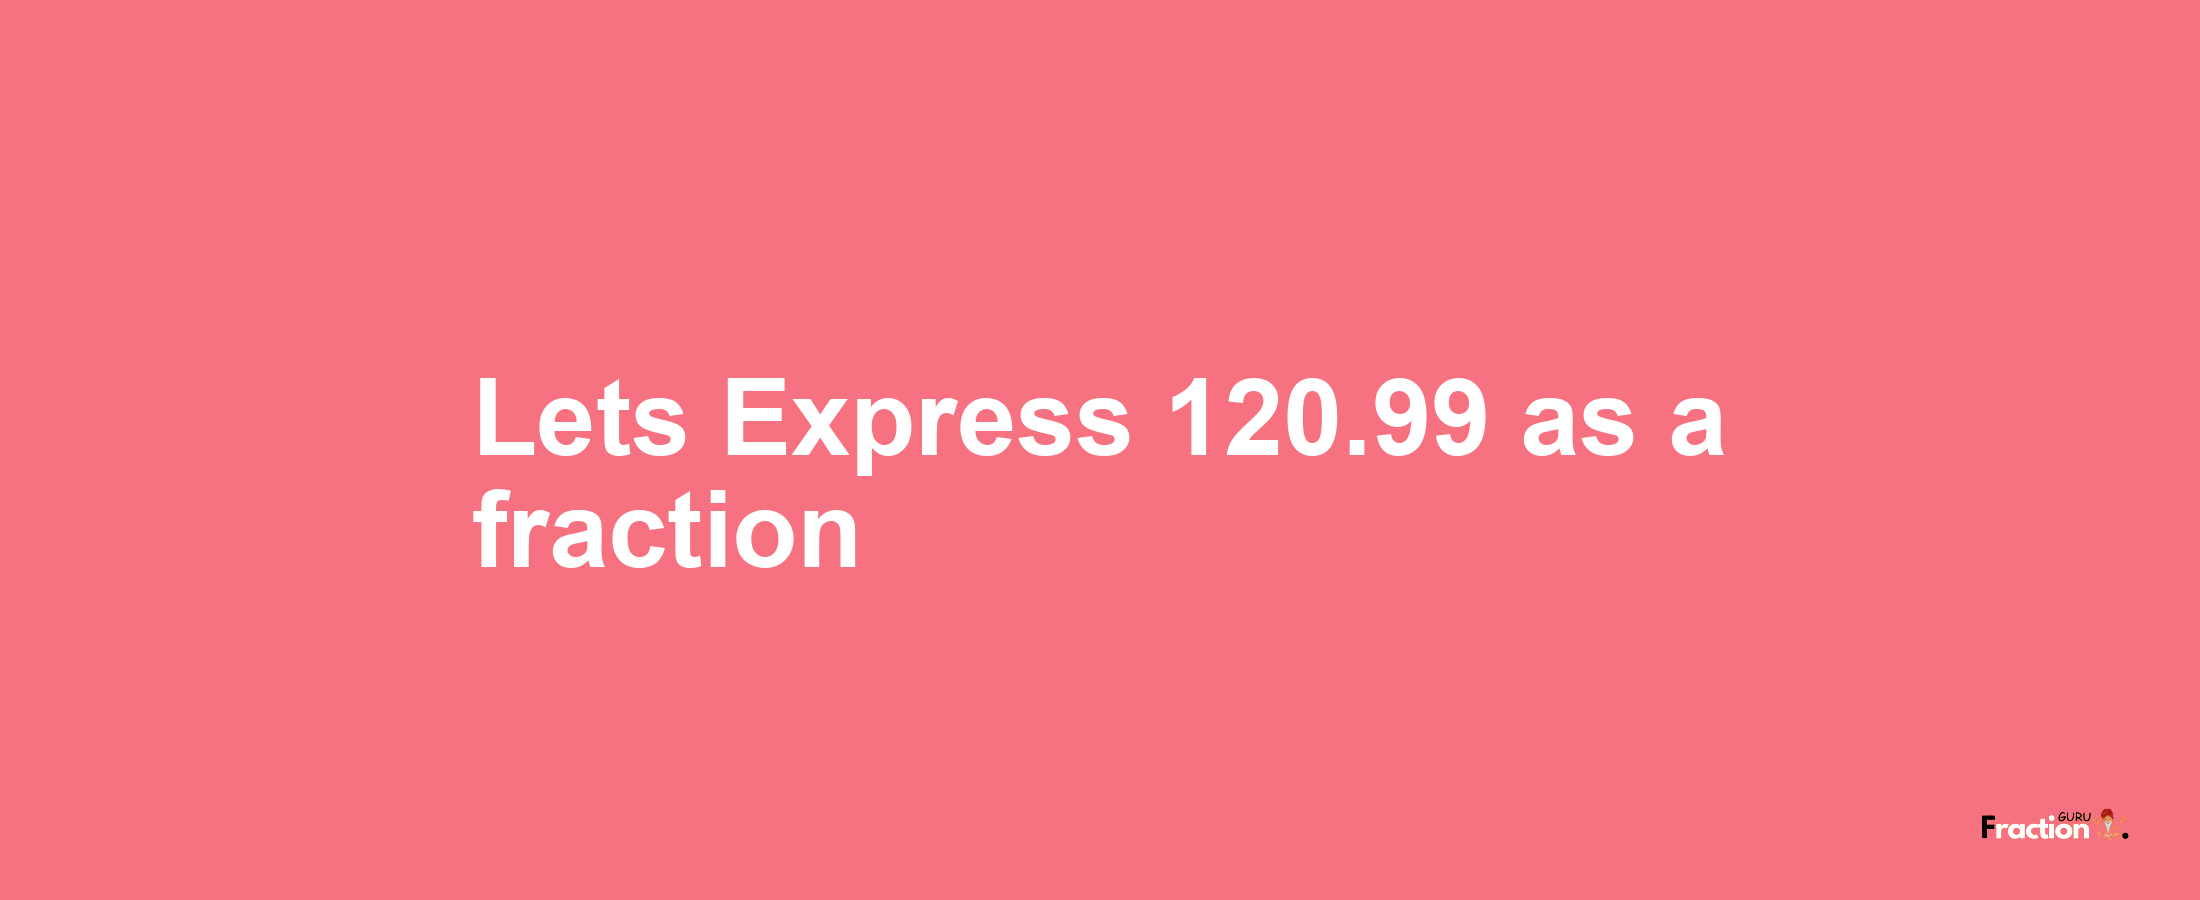 Lets Express 120.99 as afraction